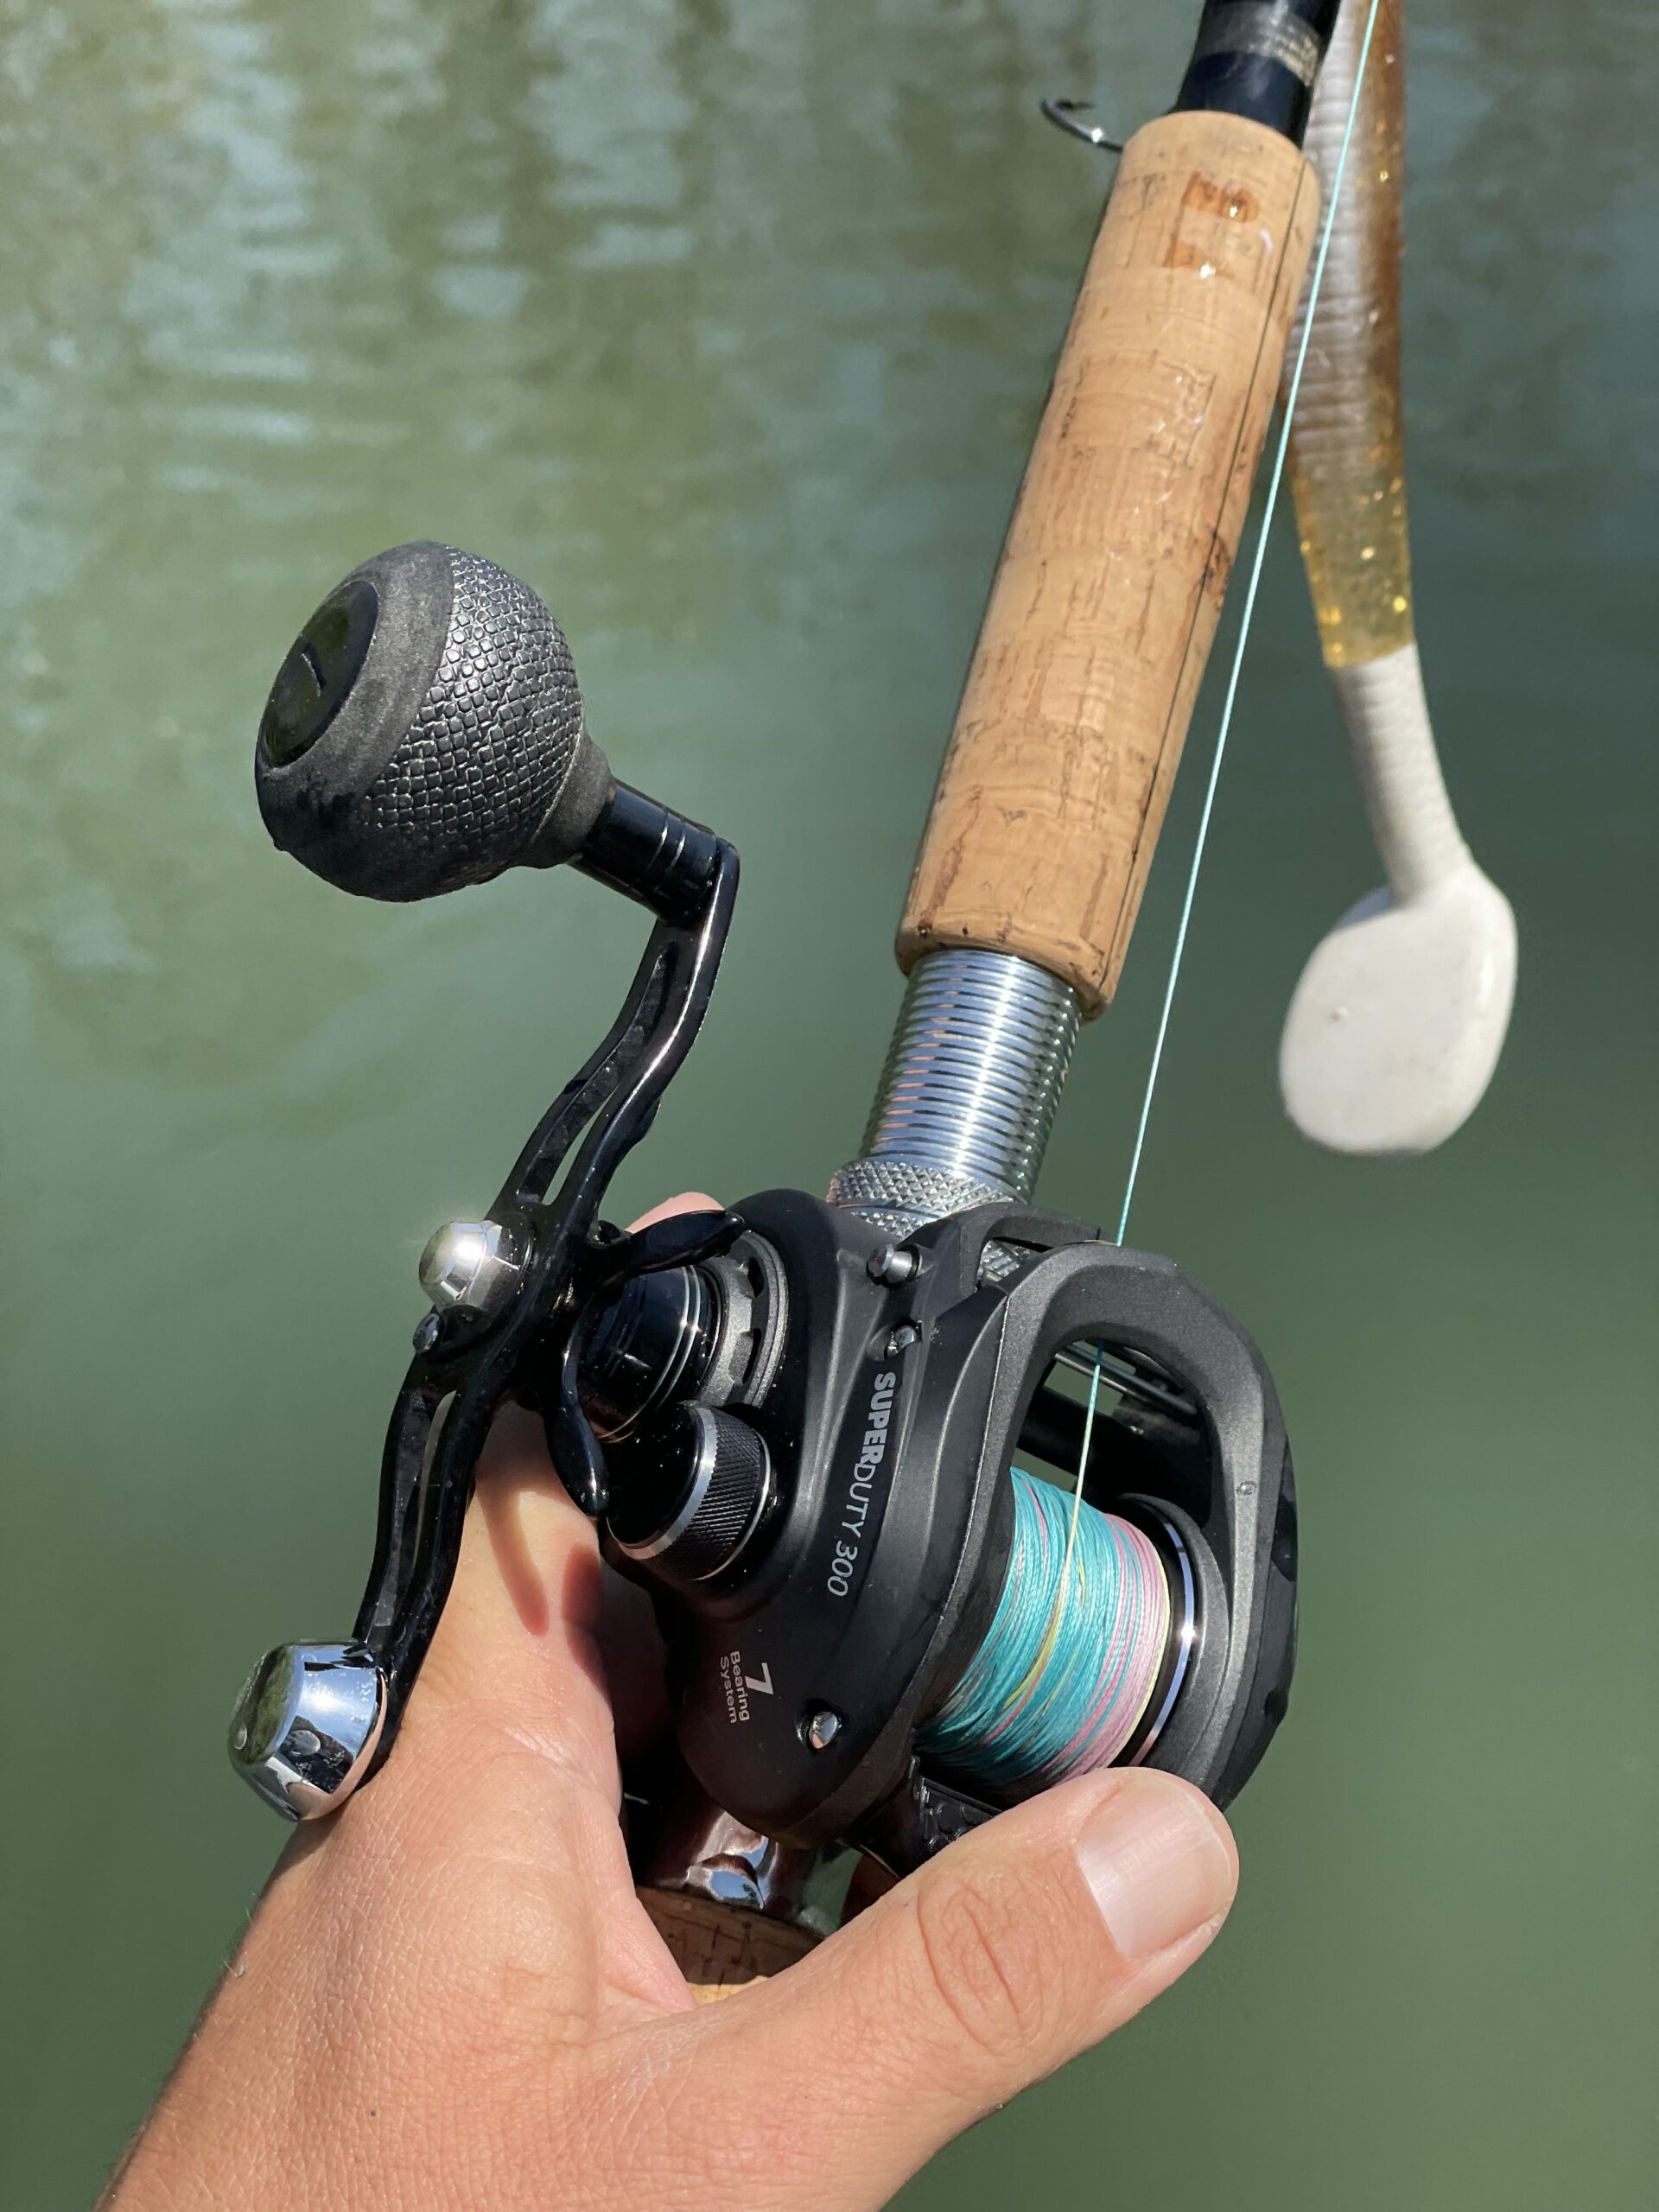 Lew's Xfinity Baitcaster Combo Reel Time - Up close with the best